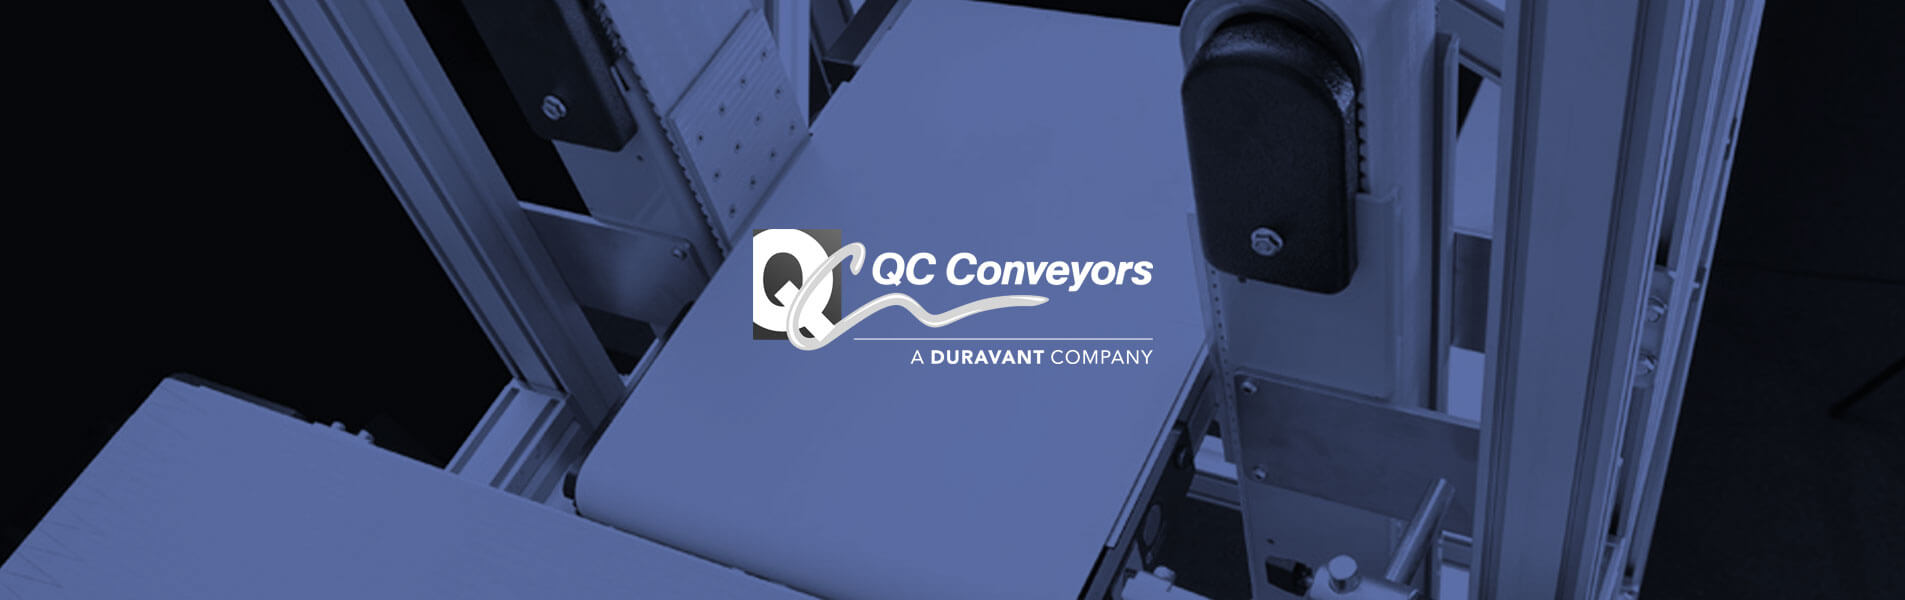 QC Conveyors – Here are your next conveyors